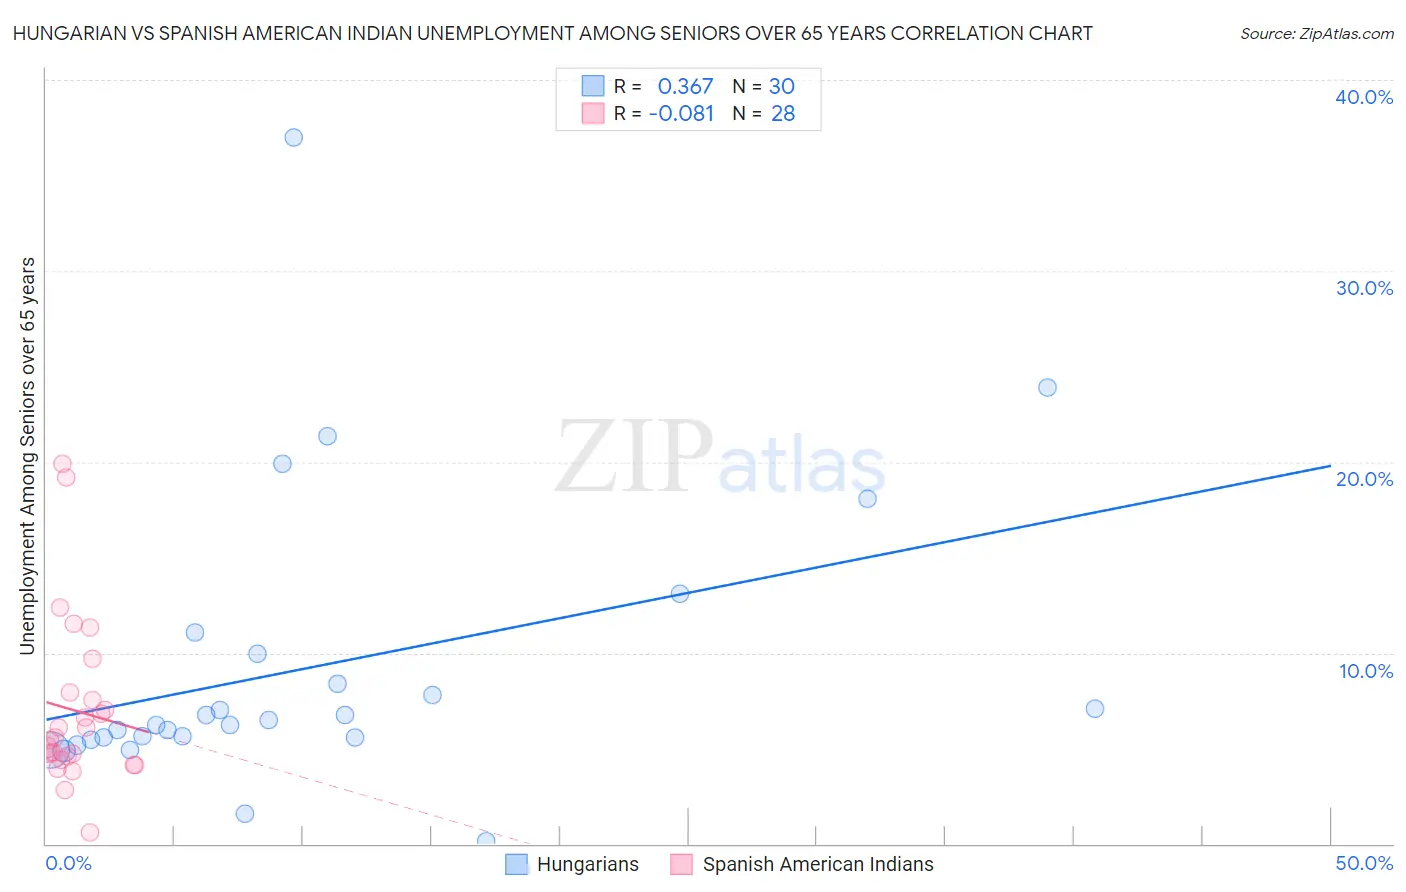 Hungarian vs Spanish American Indian Unemployment Among Seniors over 65 years